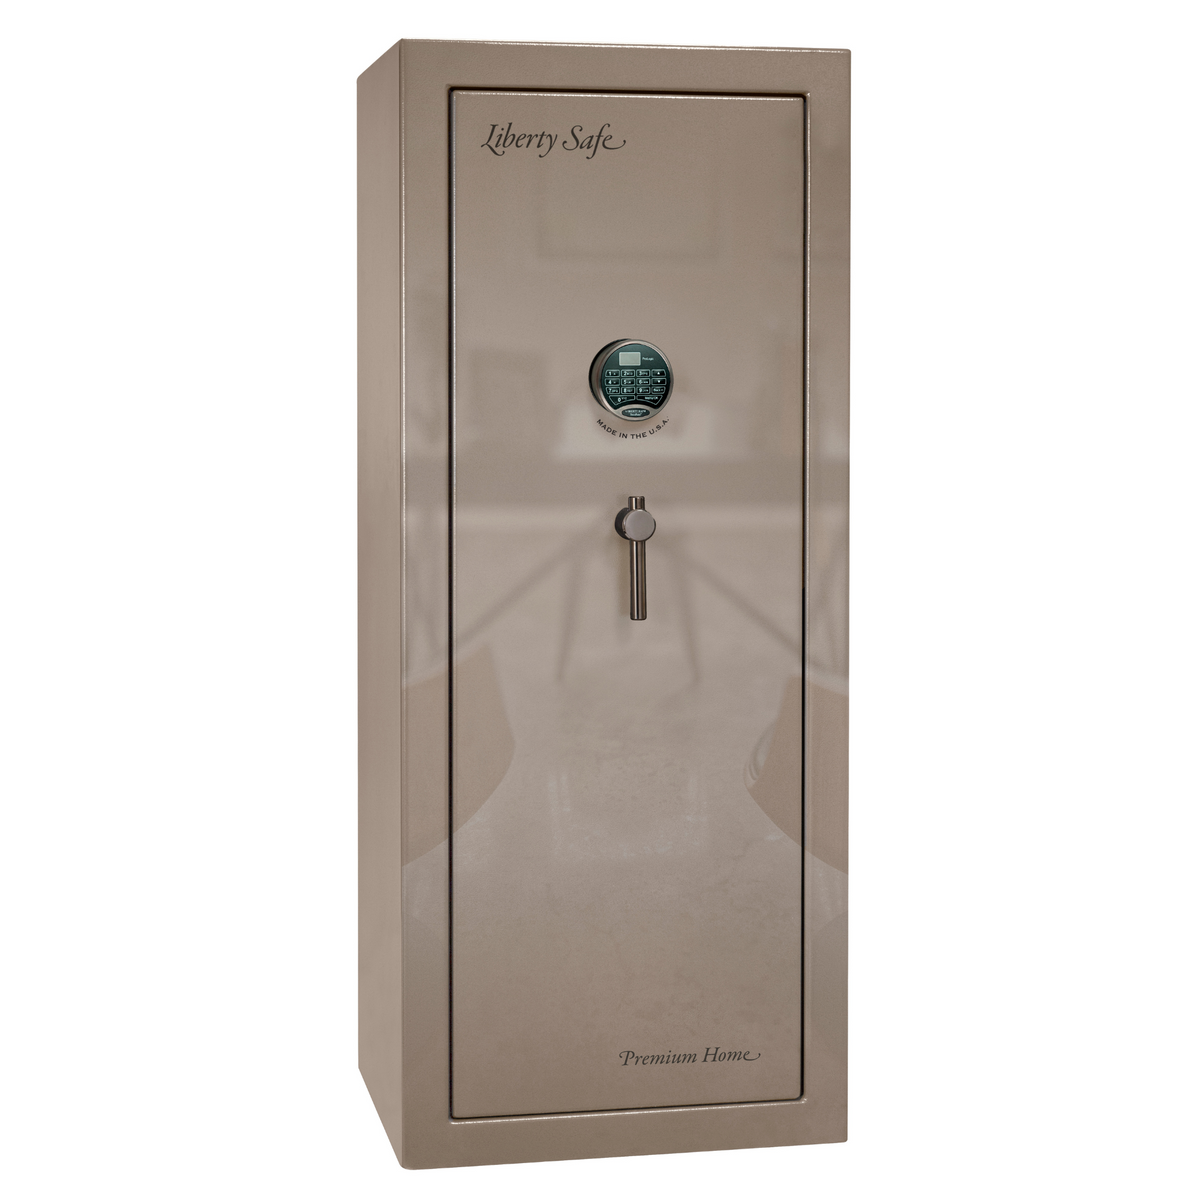 Premium Home Series | Level 7 Security | 2 Hour Fire Protection | 17 | Dimensions: 59.25&quot;(H) x 24&quot;(W) x 20.25&quot;(D) | Champagne Gloss Brass - Closed Door